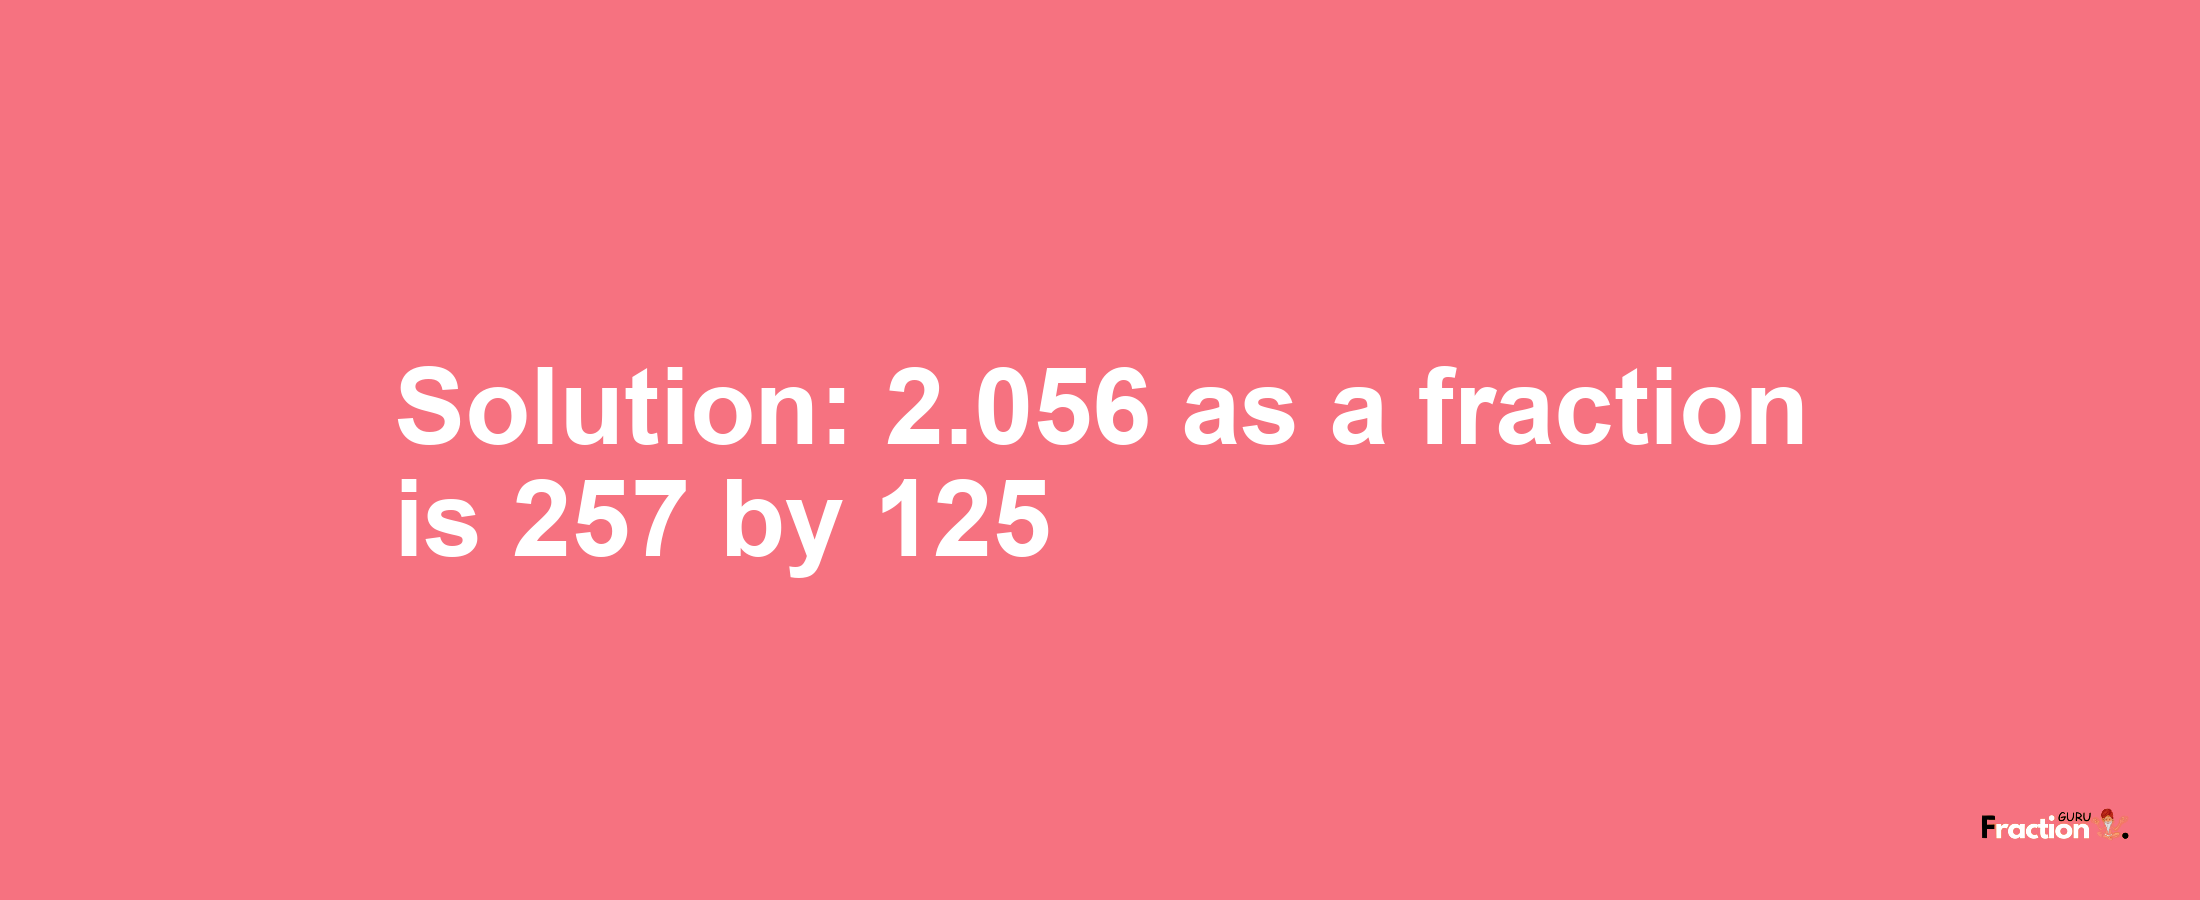 Solution:2.056 as a fraction is 257/125